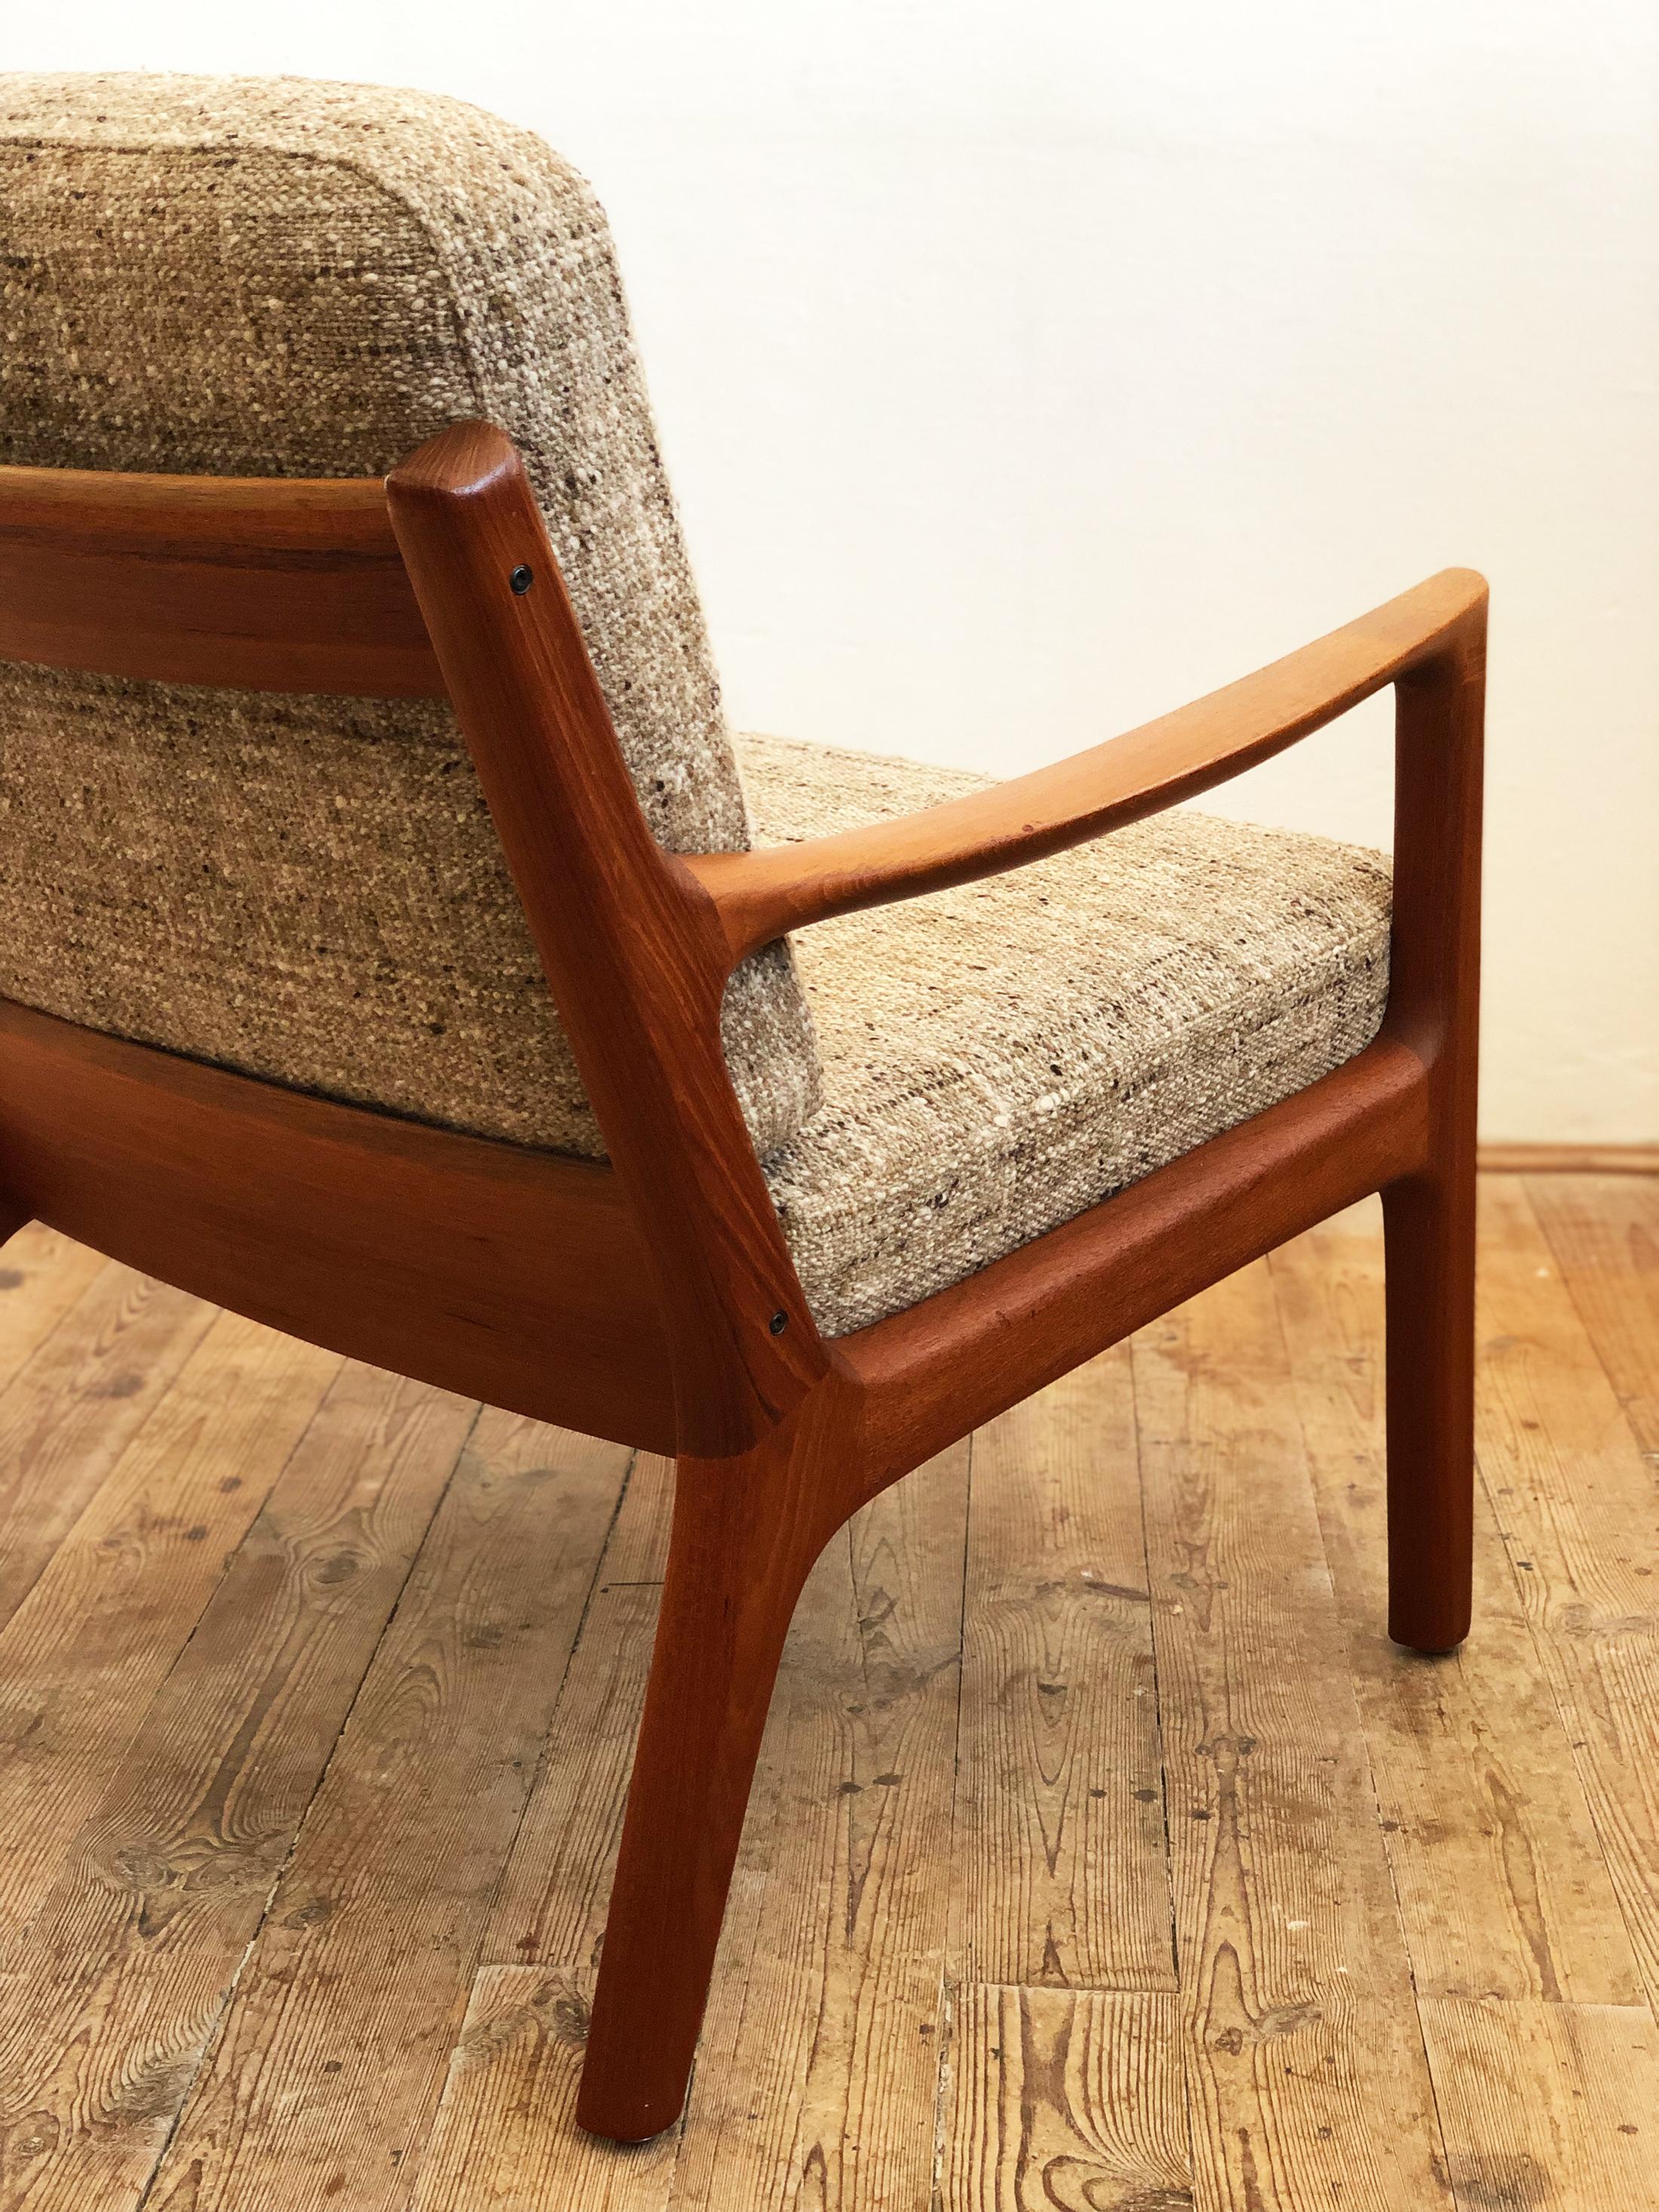 Midcentury Teak Lounge Chair, Senator Series, Ole Wanscher for France and Son 1